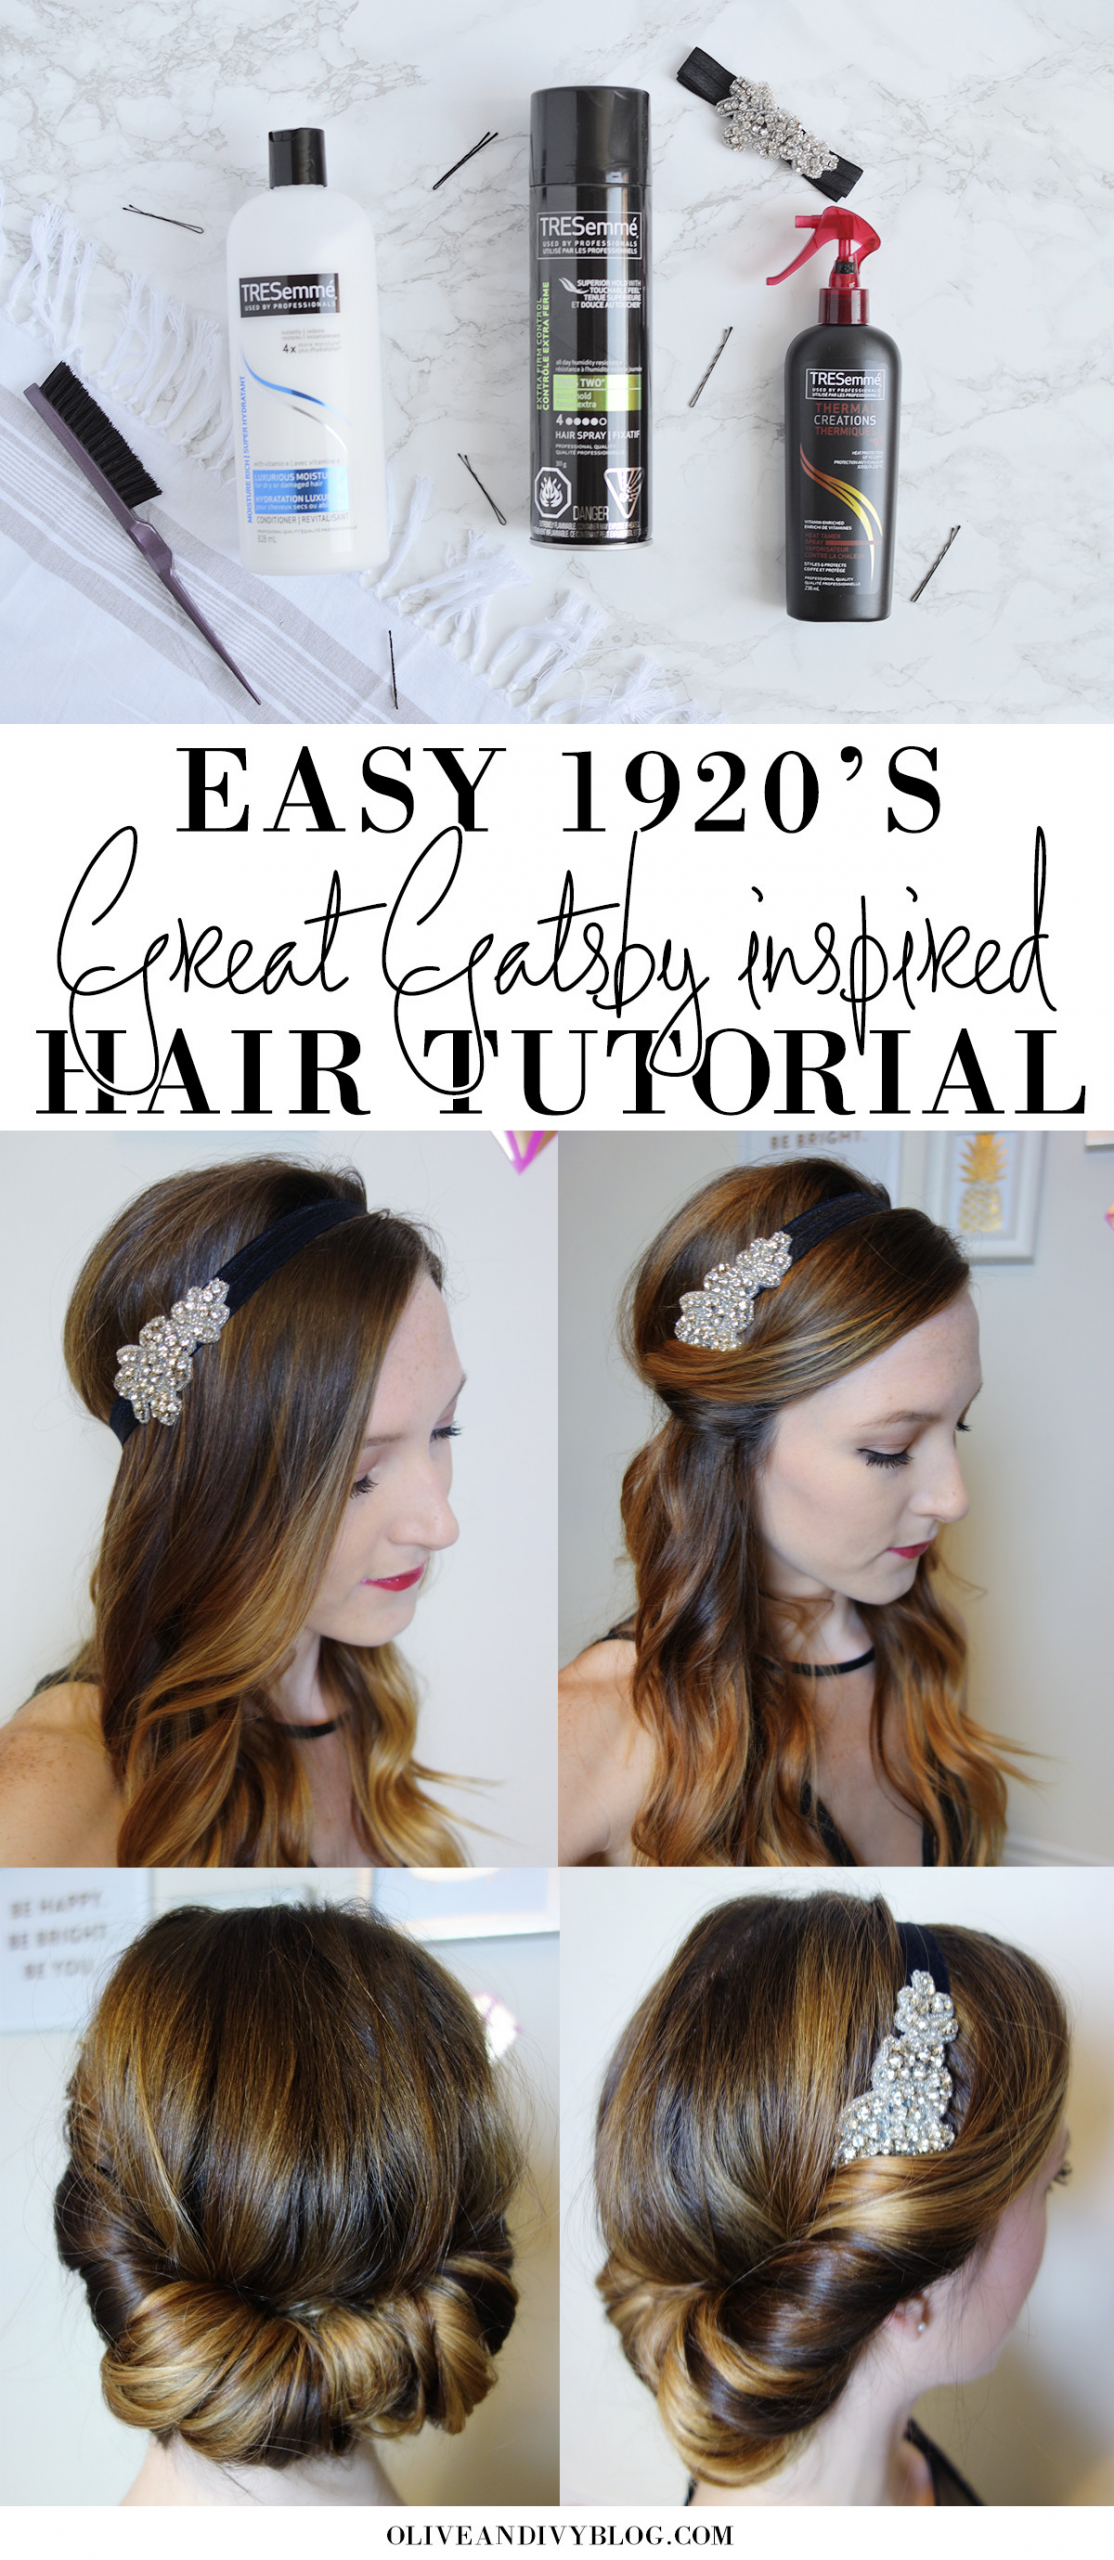 How To Do A 1920S Hairstyle For Long Hair
 Easy 1920 s Great Gatsby Hair Tutorial 1920s